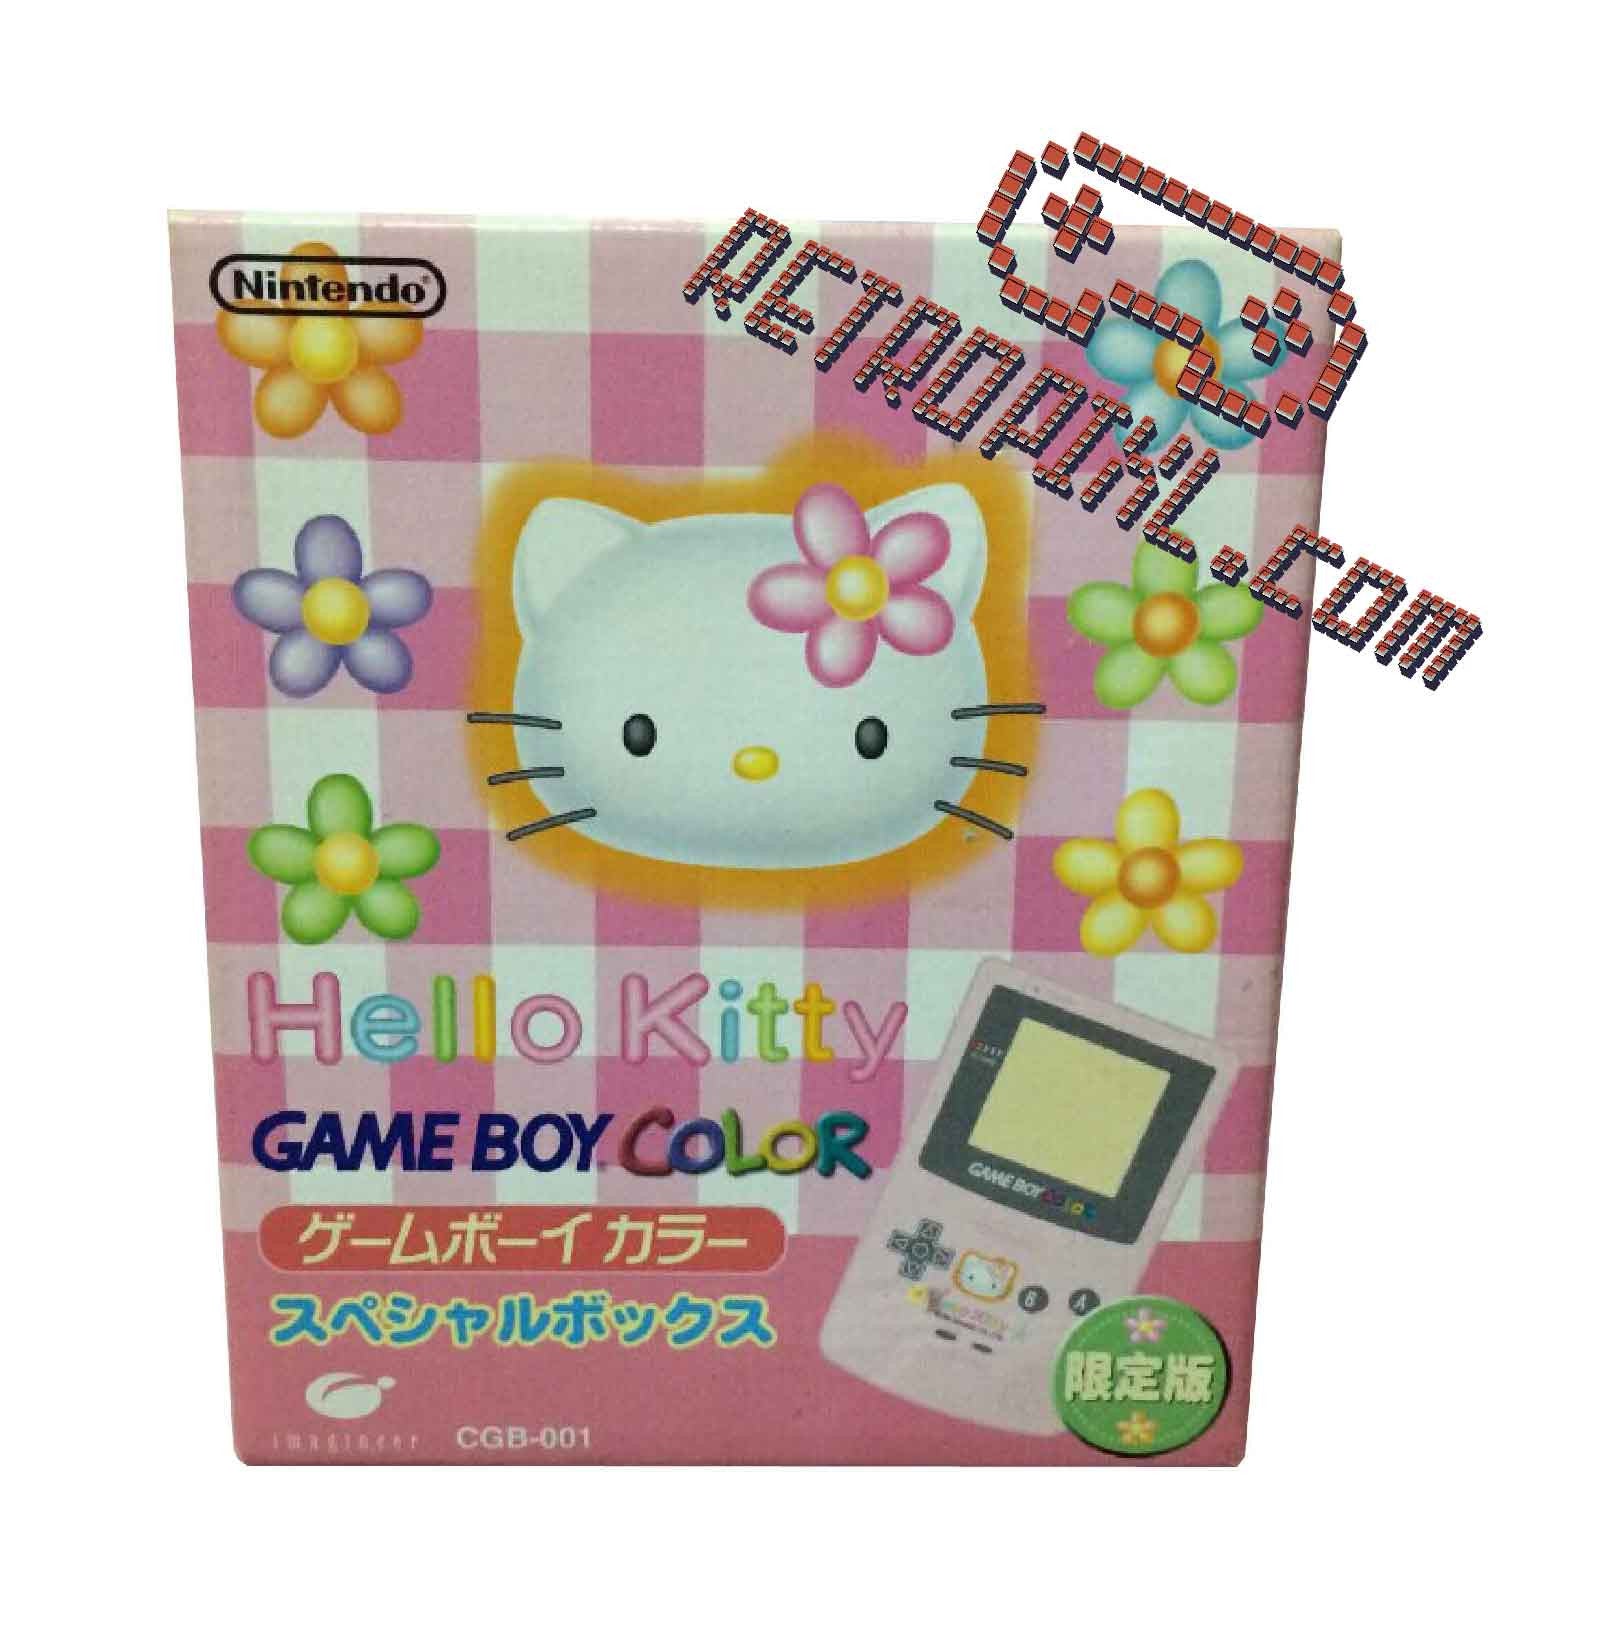 Nintendo Game Boy Color Hello Kitty LIMITED EDITION